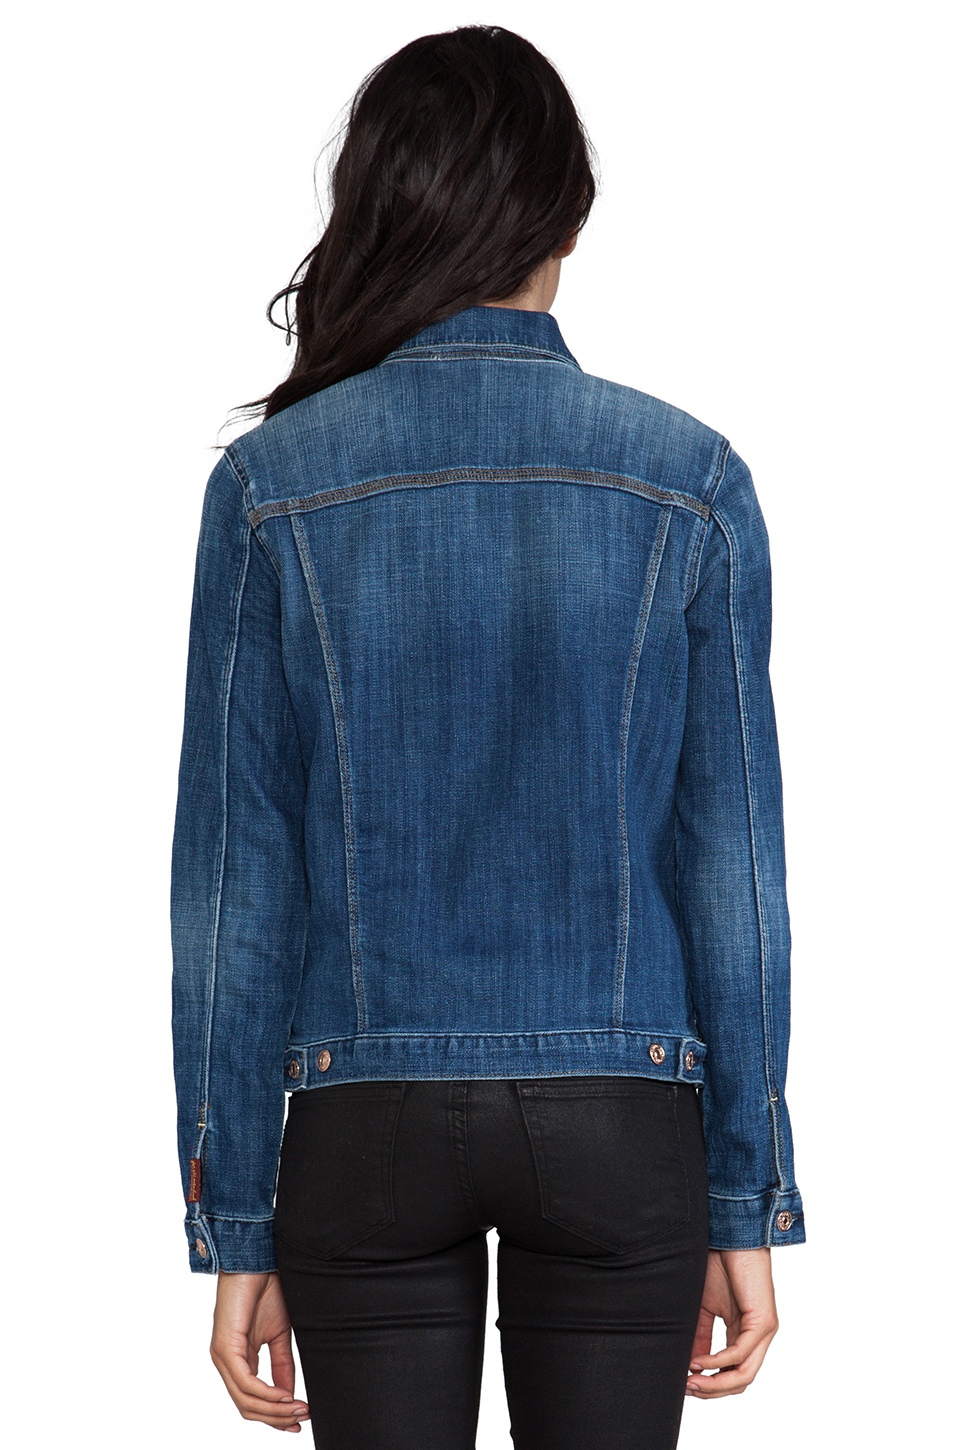 7 For All Mankind Classic Denim Jacket in Navy in Blue - Lyst